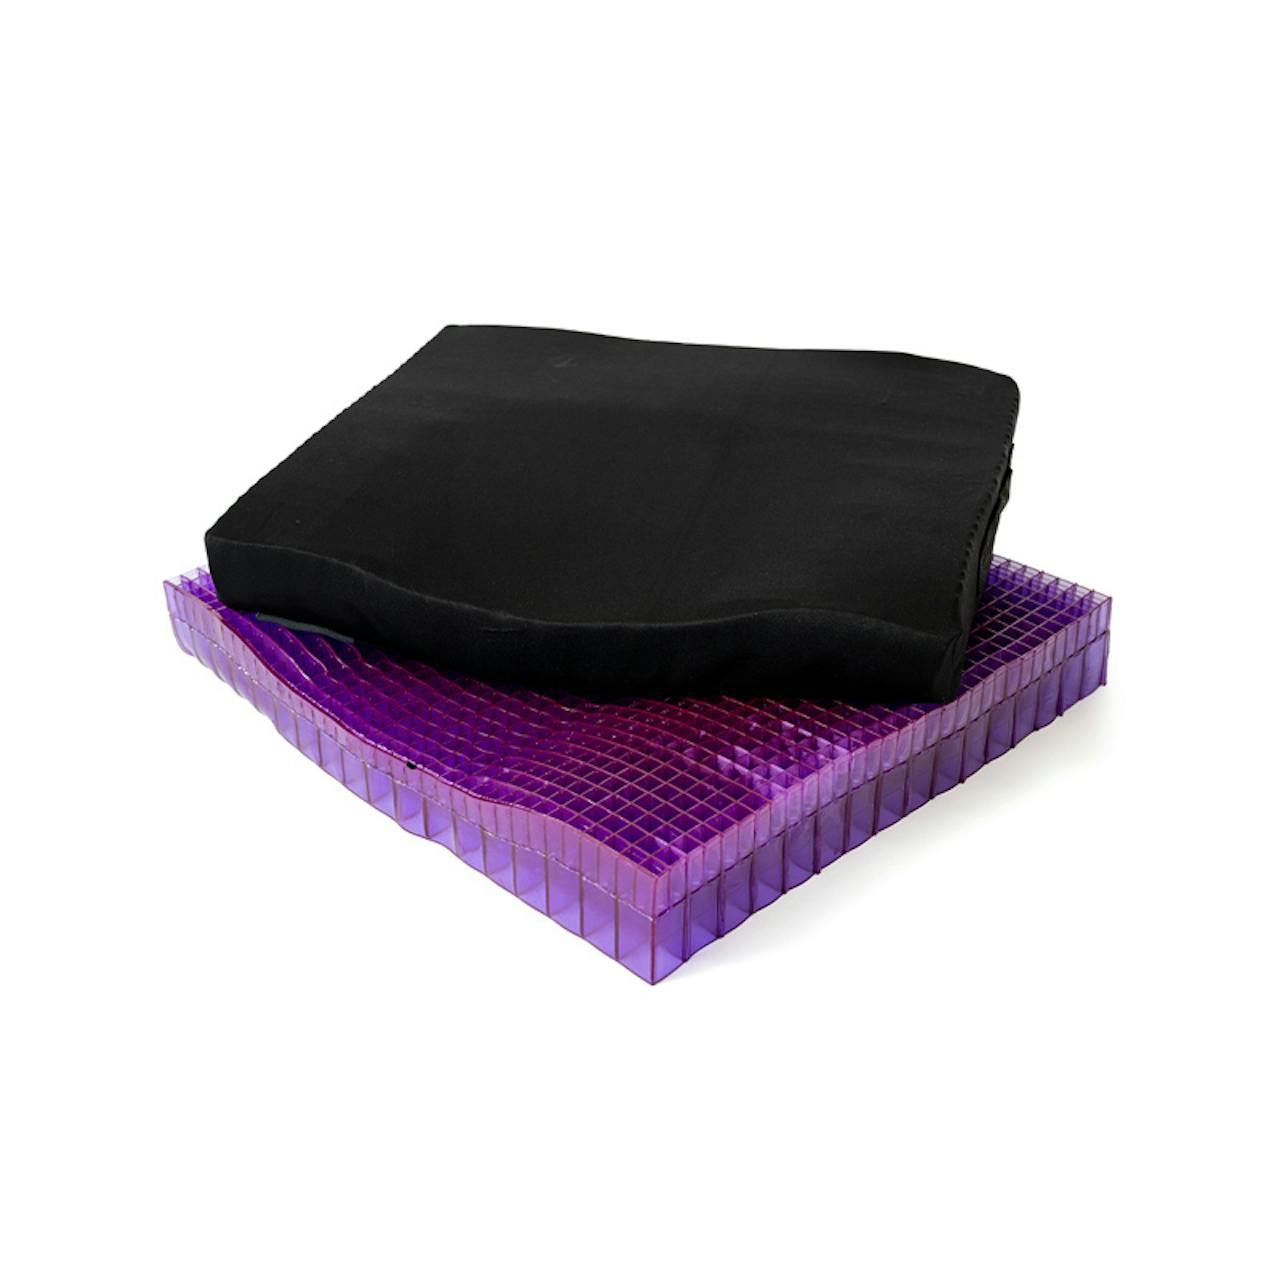 https://raneys-cdn11.imgix.net/images/stencil/original/products/201567/144044/Purple-Ultimate-Seat-Cushion-DASPSCUMT01__69870.1571170212.jpg?auto=compress,format&w=1280